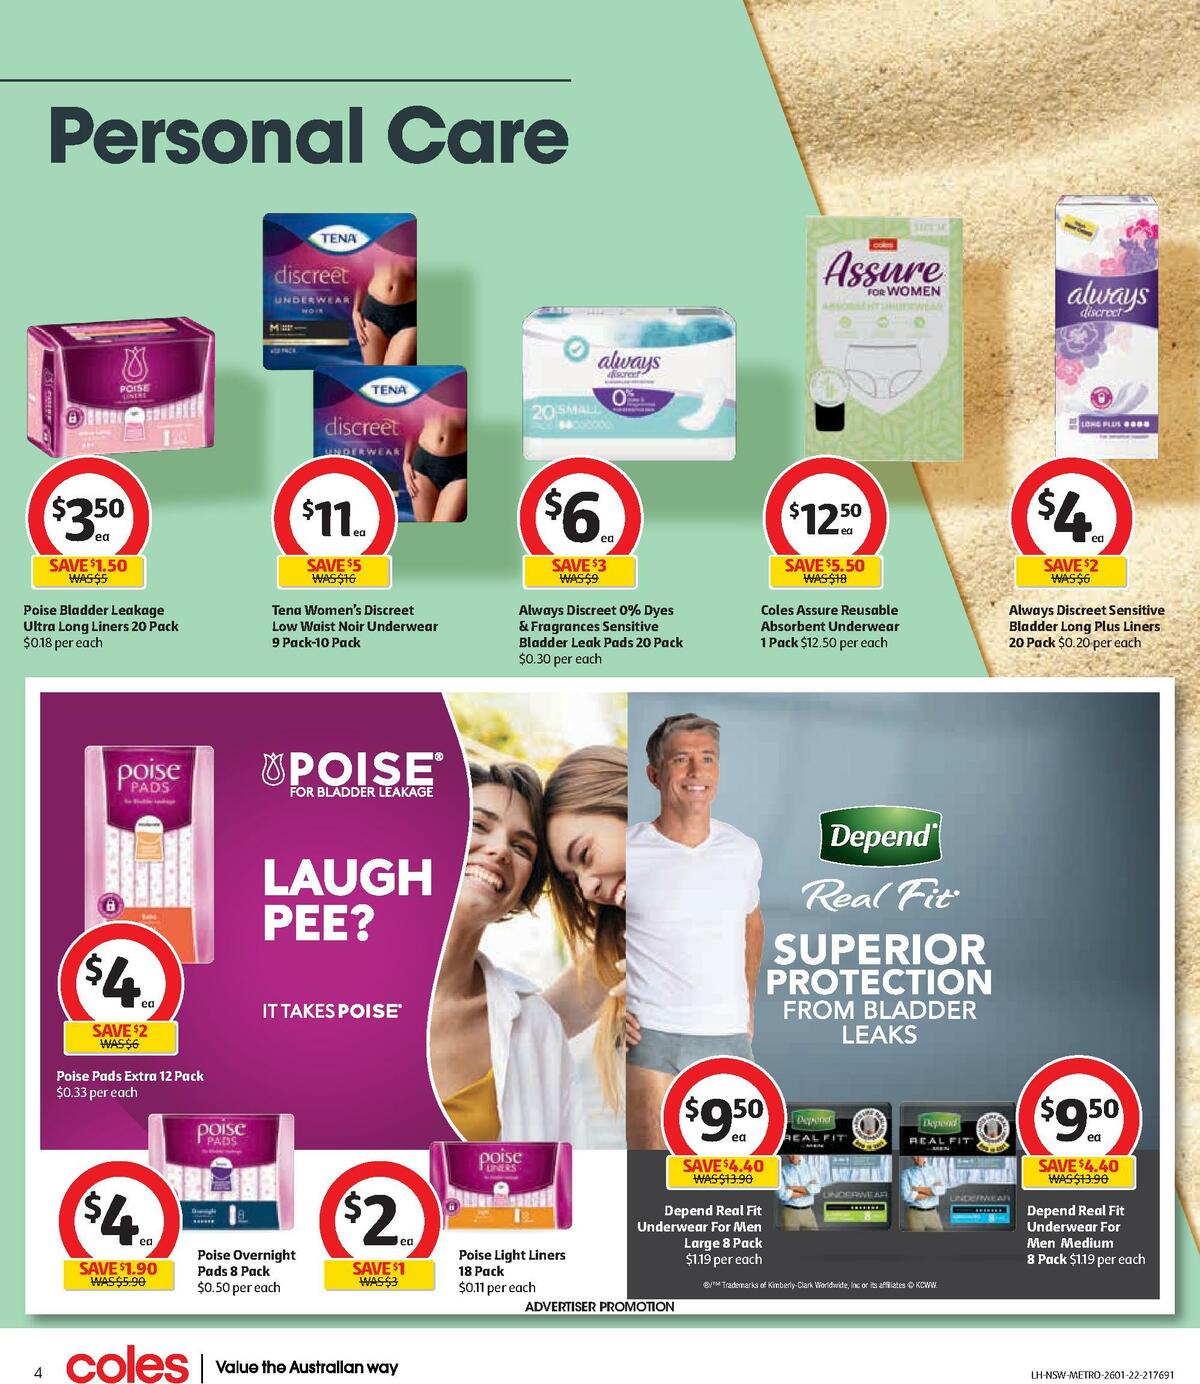 Coles Health & Beauty Catalogues from 26 January